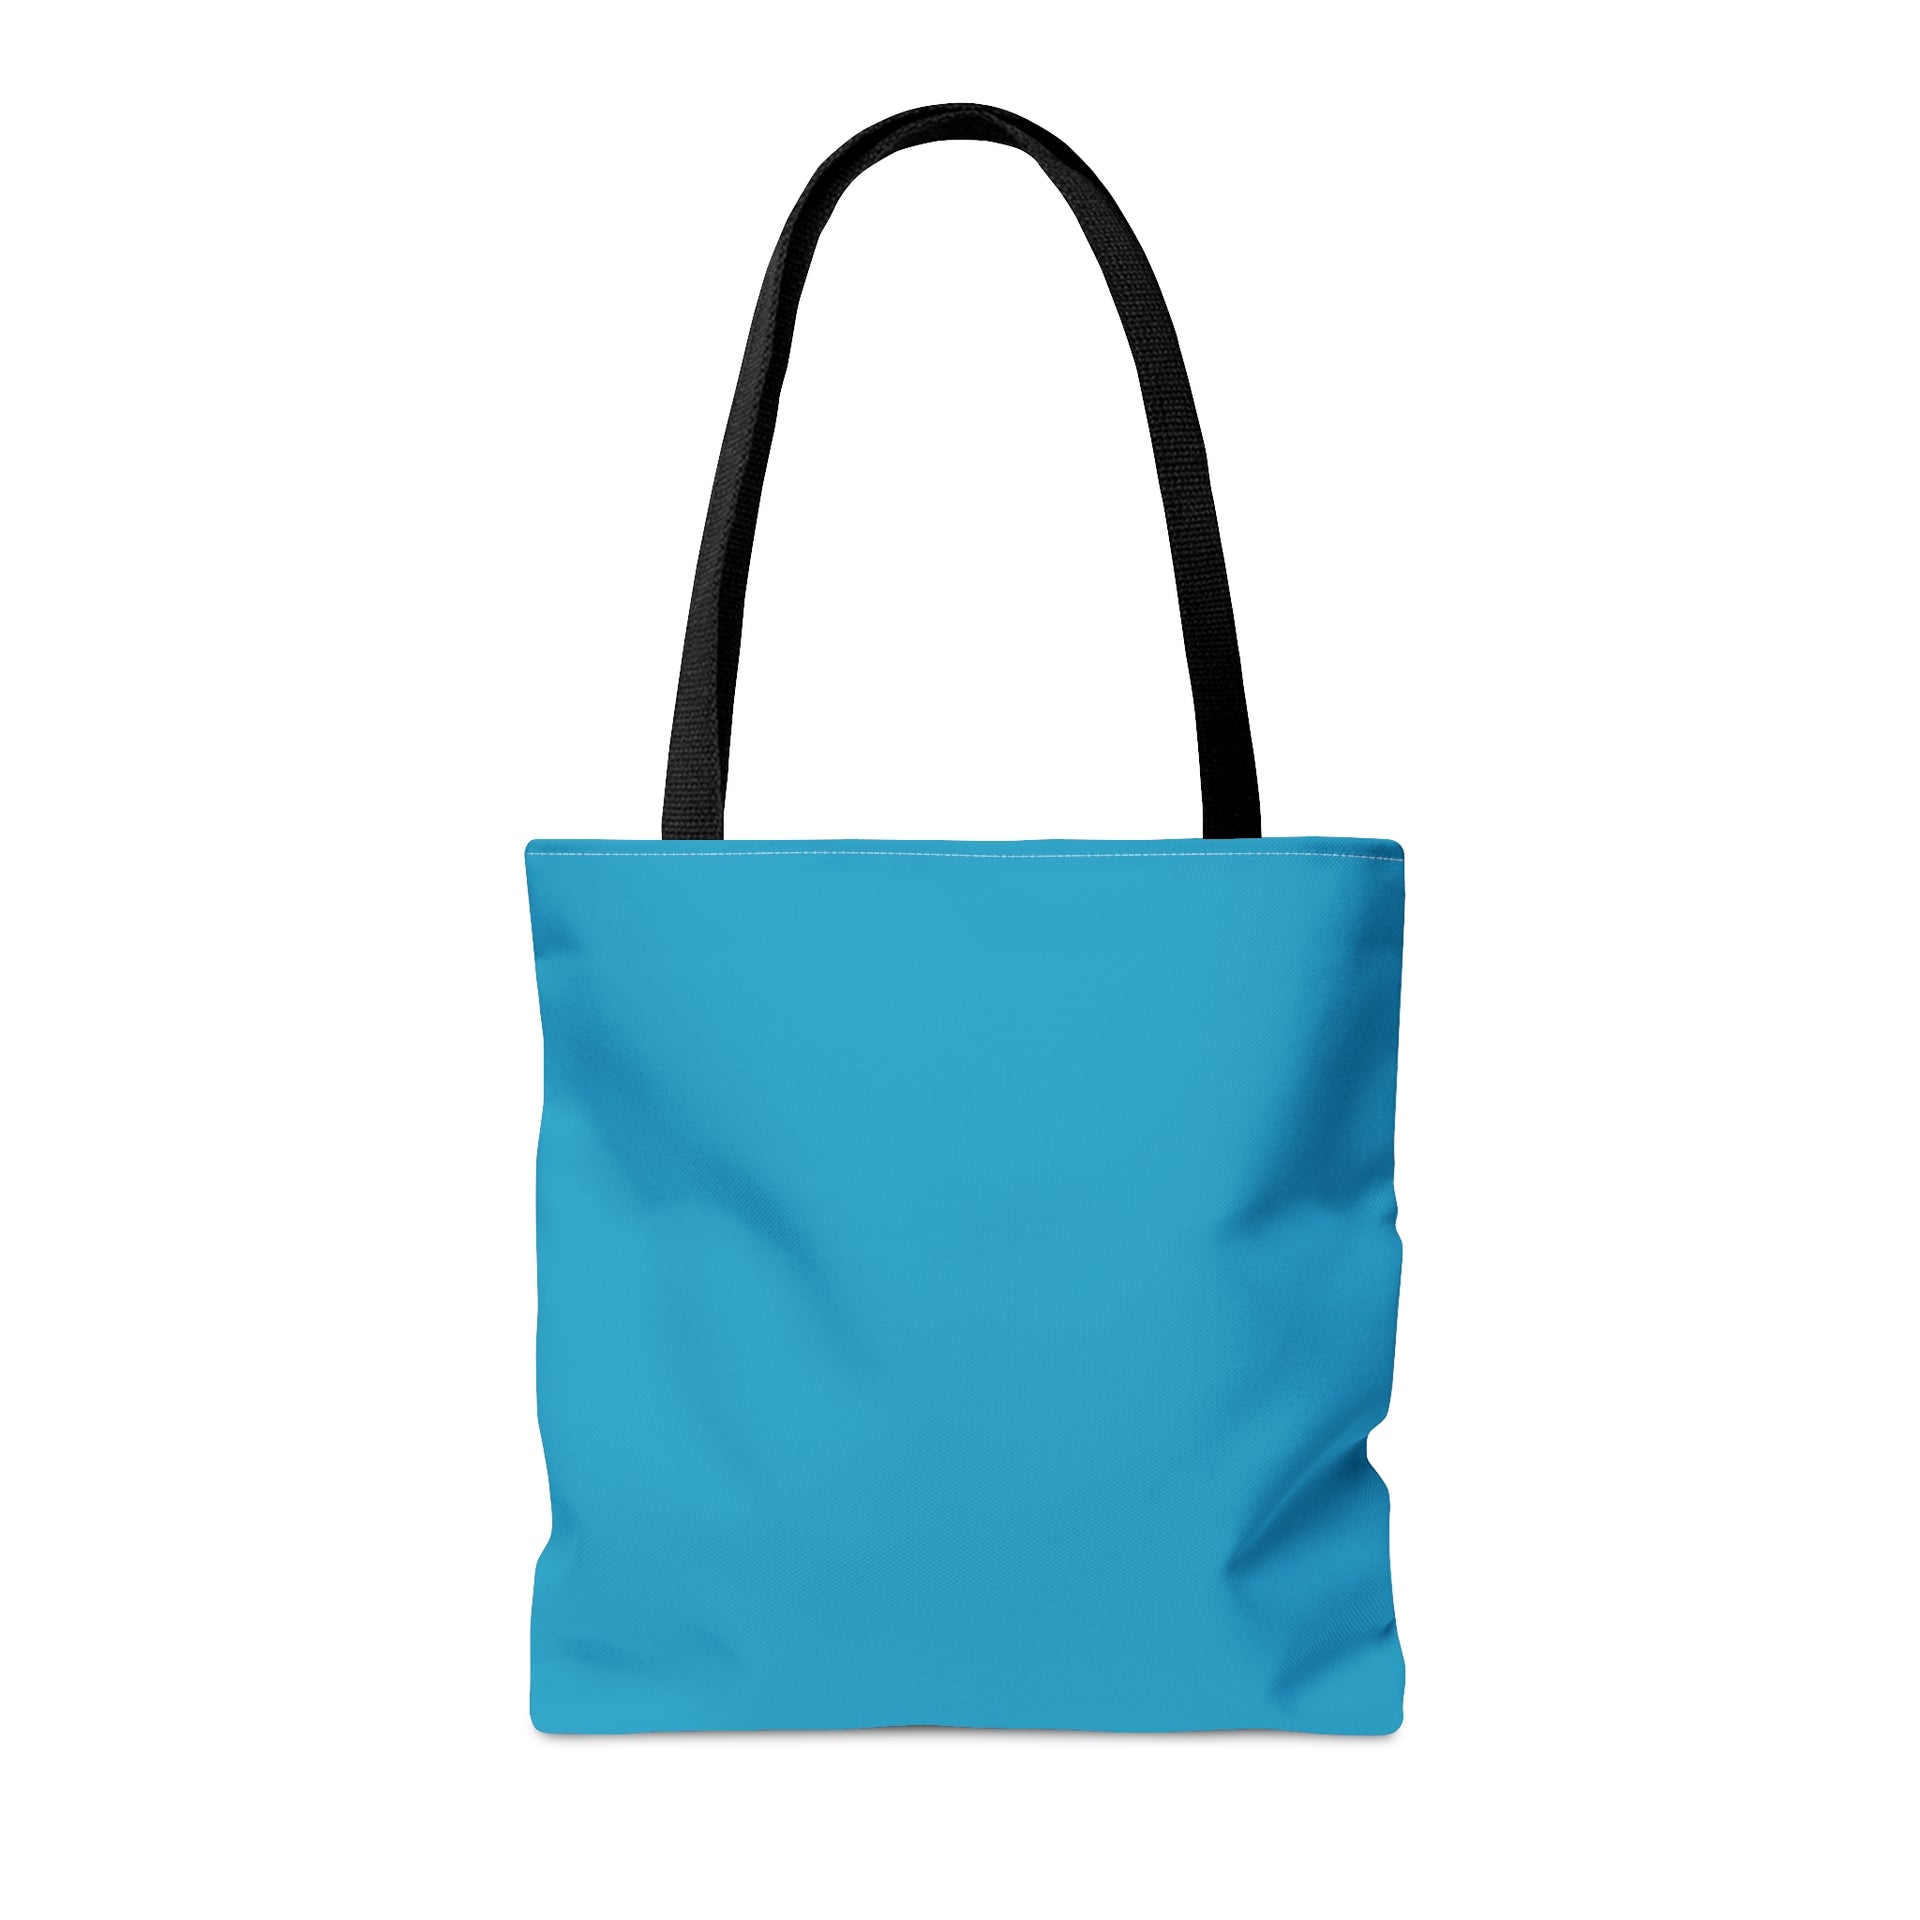 Not a product Tote Bag